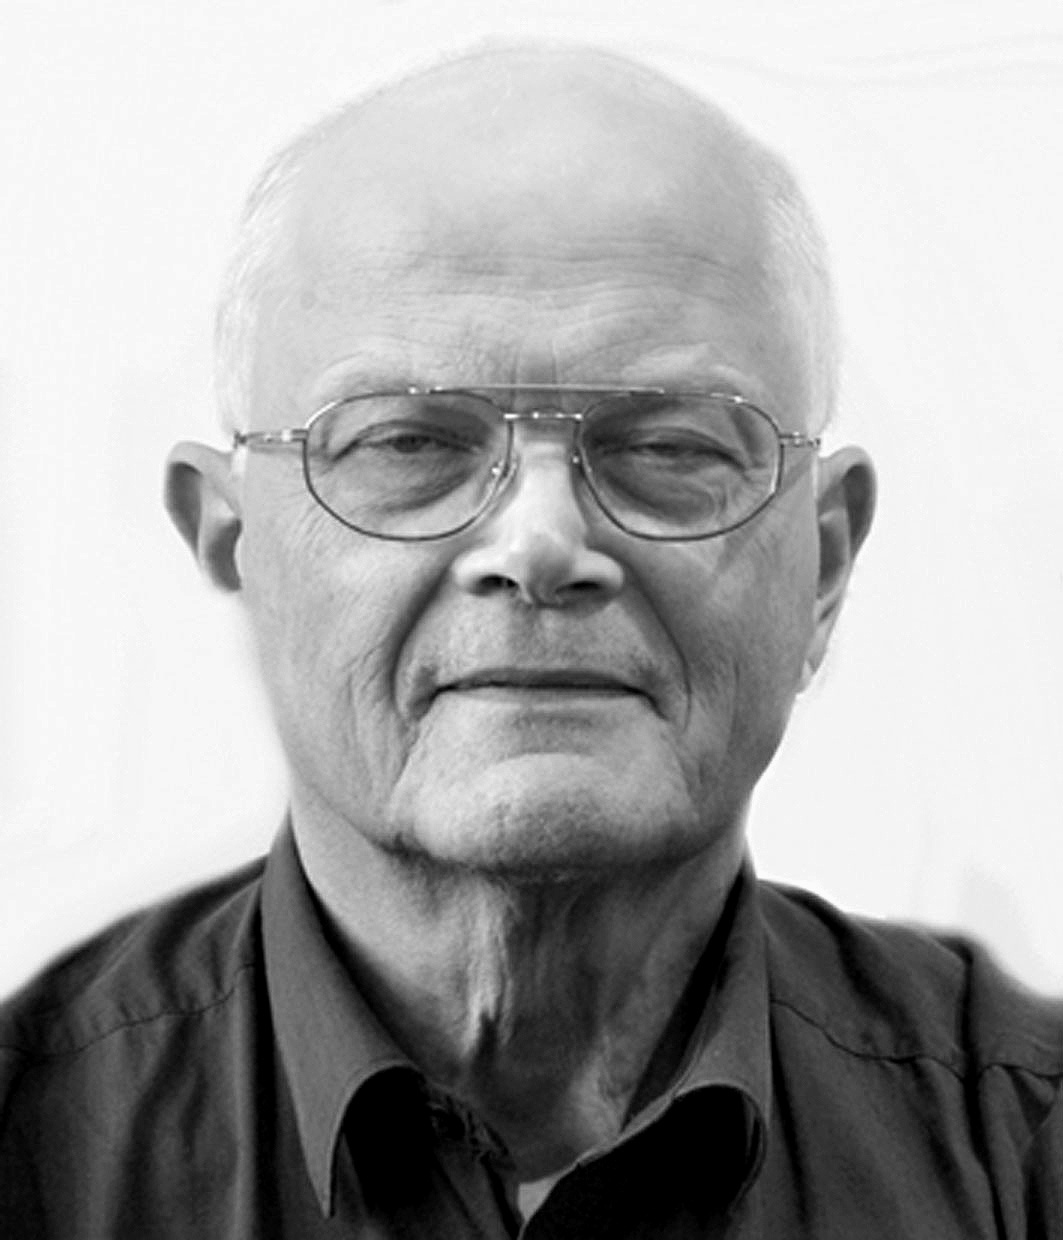 The photo shows a portrait of Karl Heinz Roth 